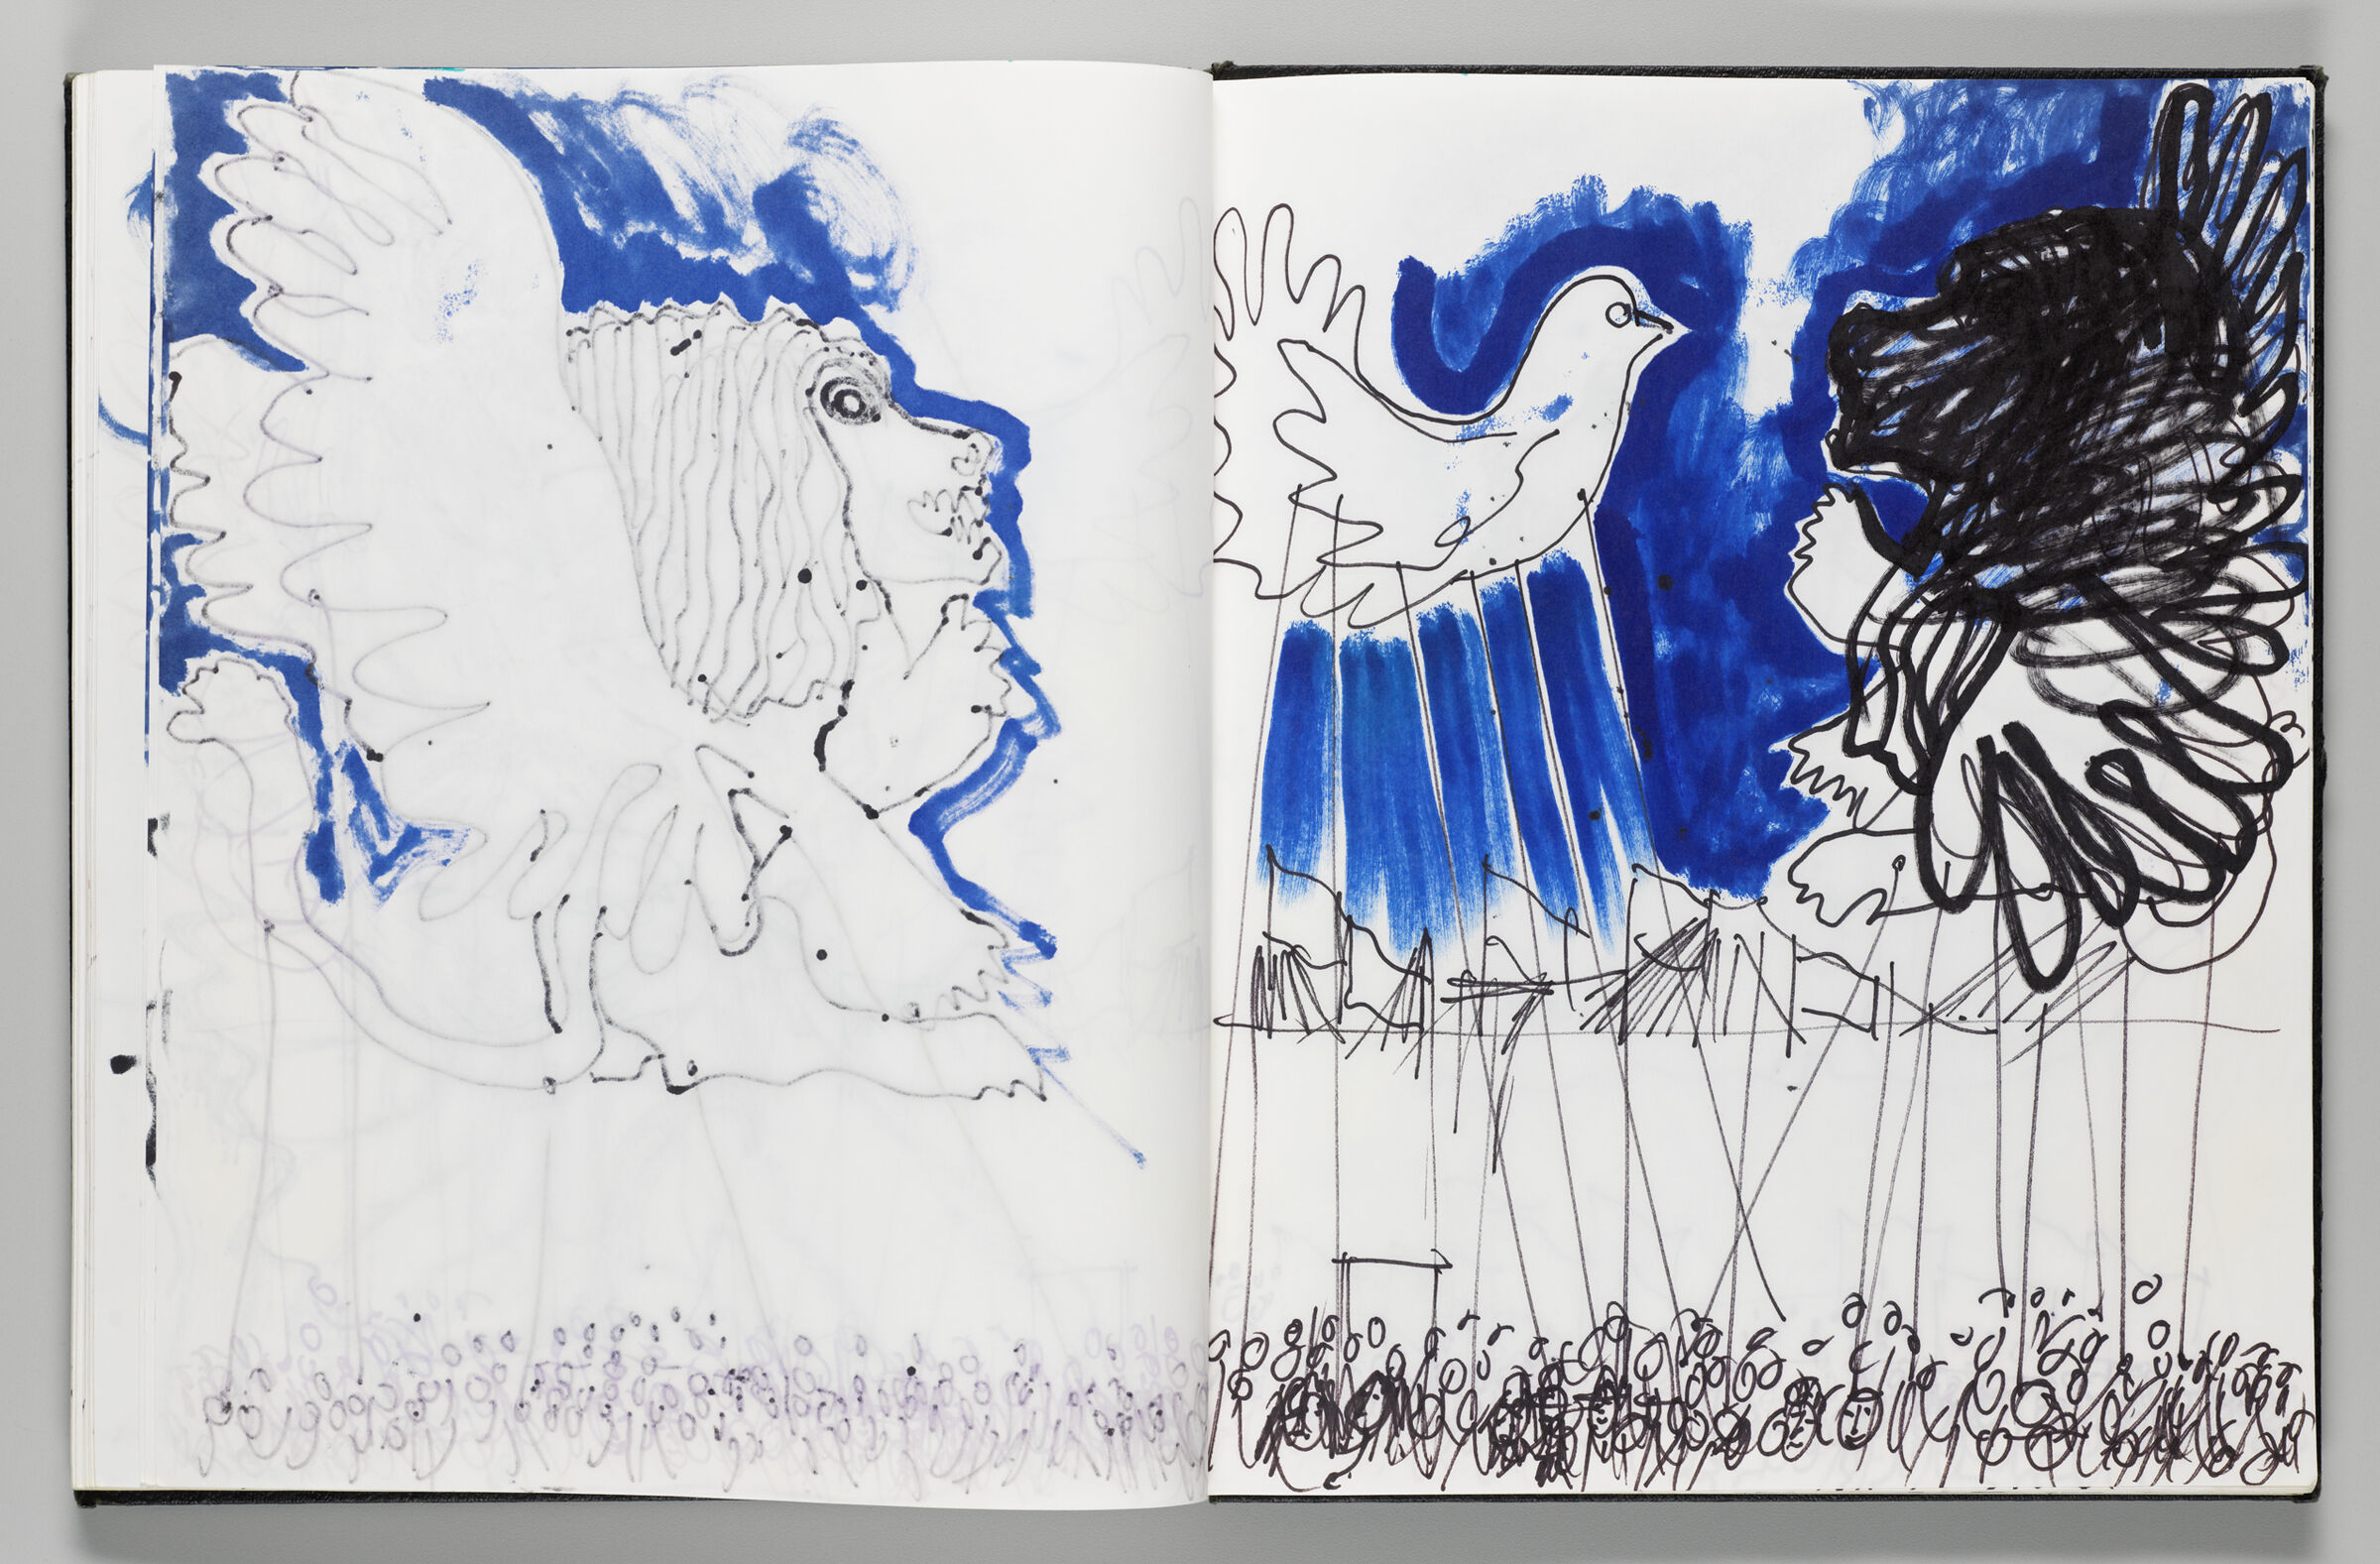 Untitled (Bleed-Through Of Previous Page, Left Page); Untitled (Winged Lion [Based On Löwenbrau Logo]  And Bird Inflatables With Color Transfer, Right Page)